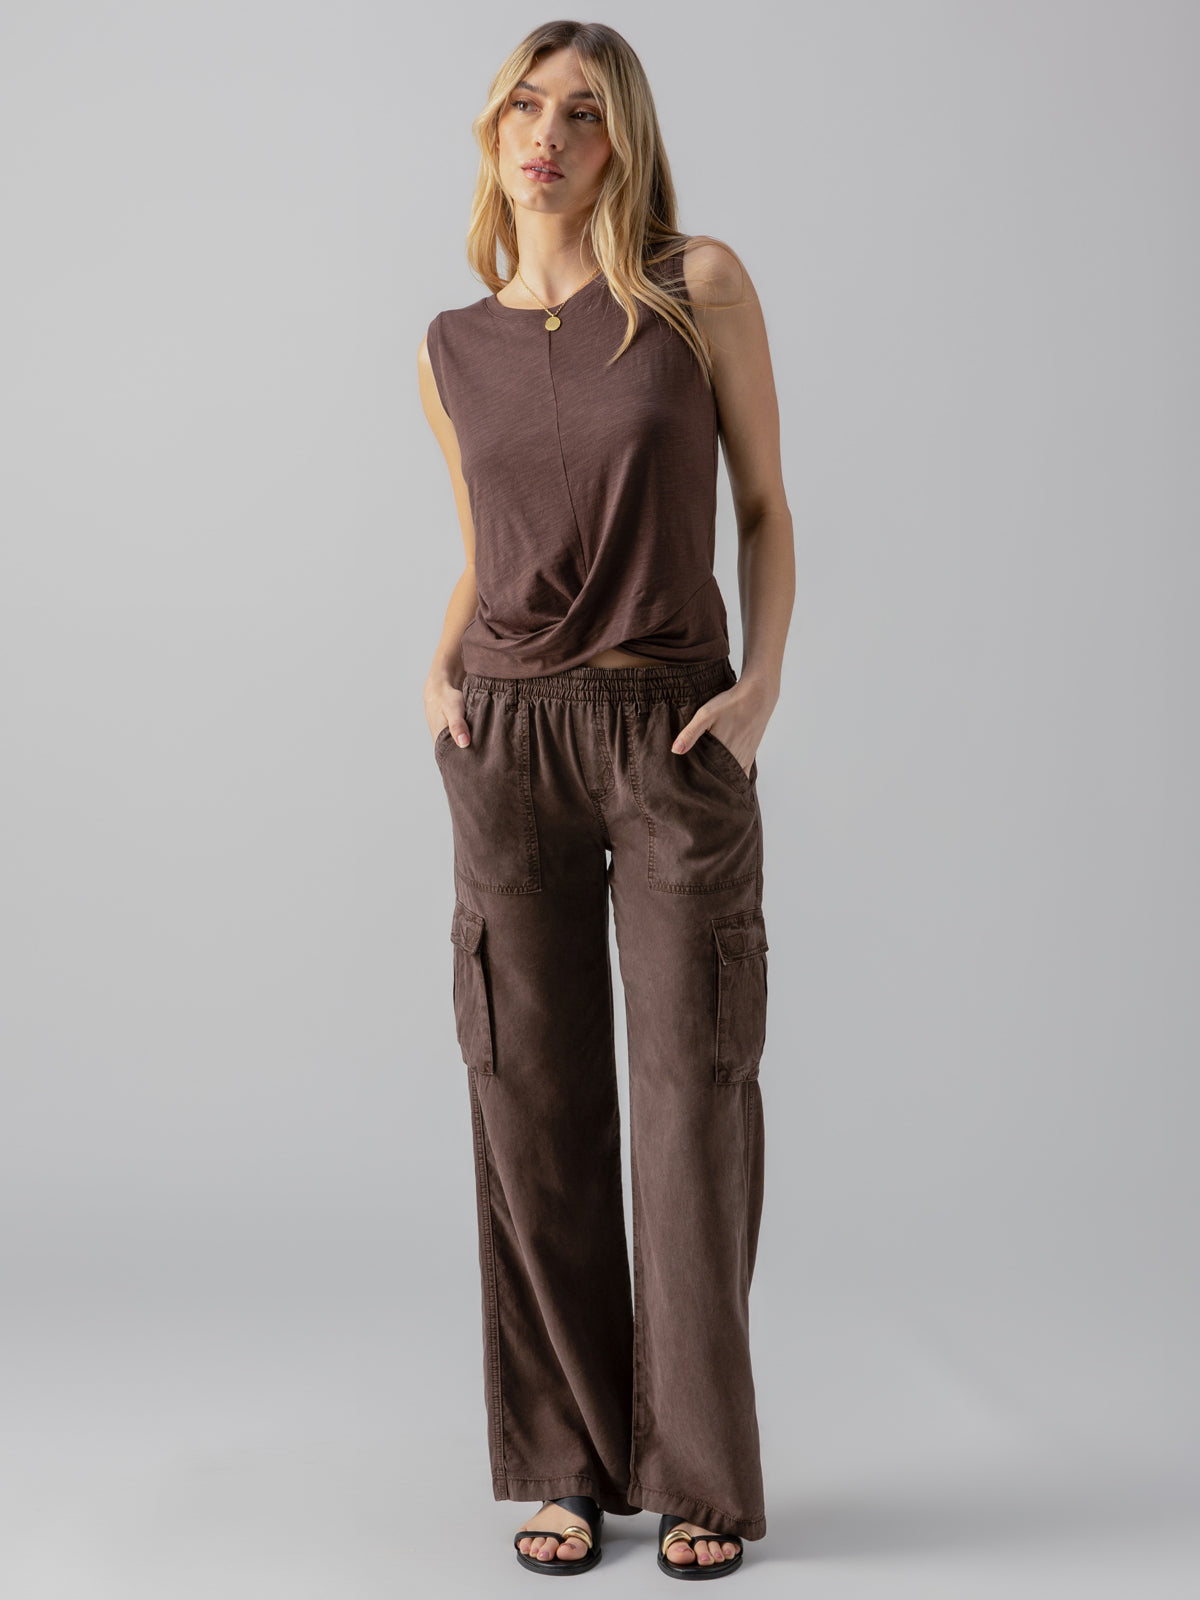 Relaxed Reissue Cargo Standard Rise Pant Mud Bath